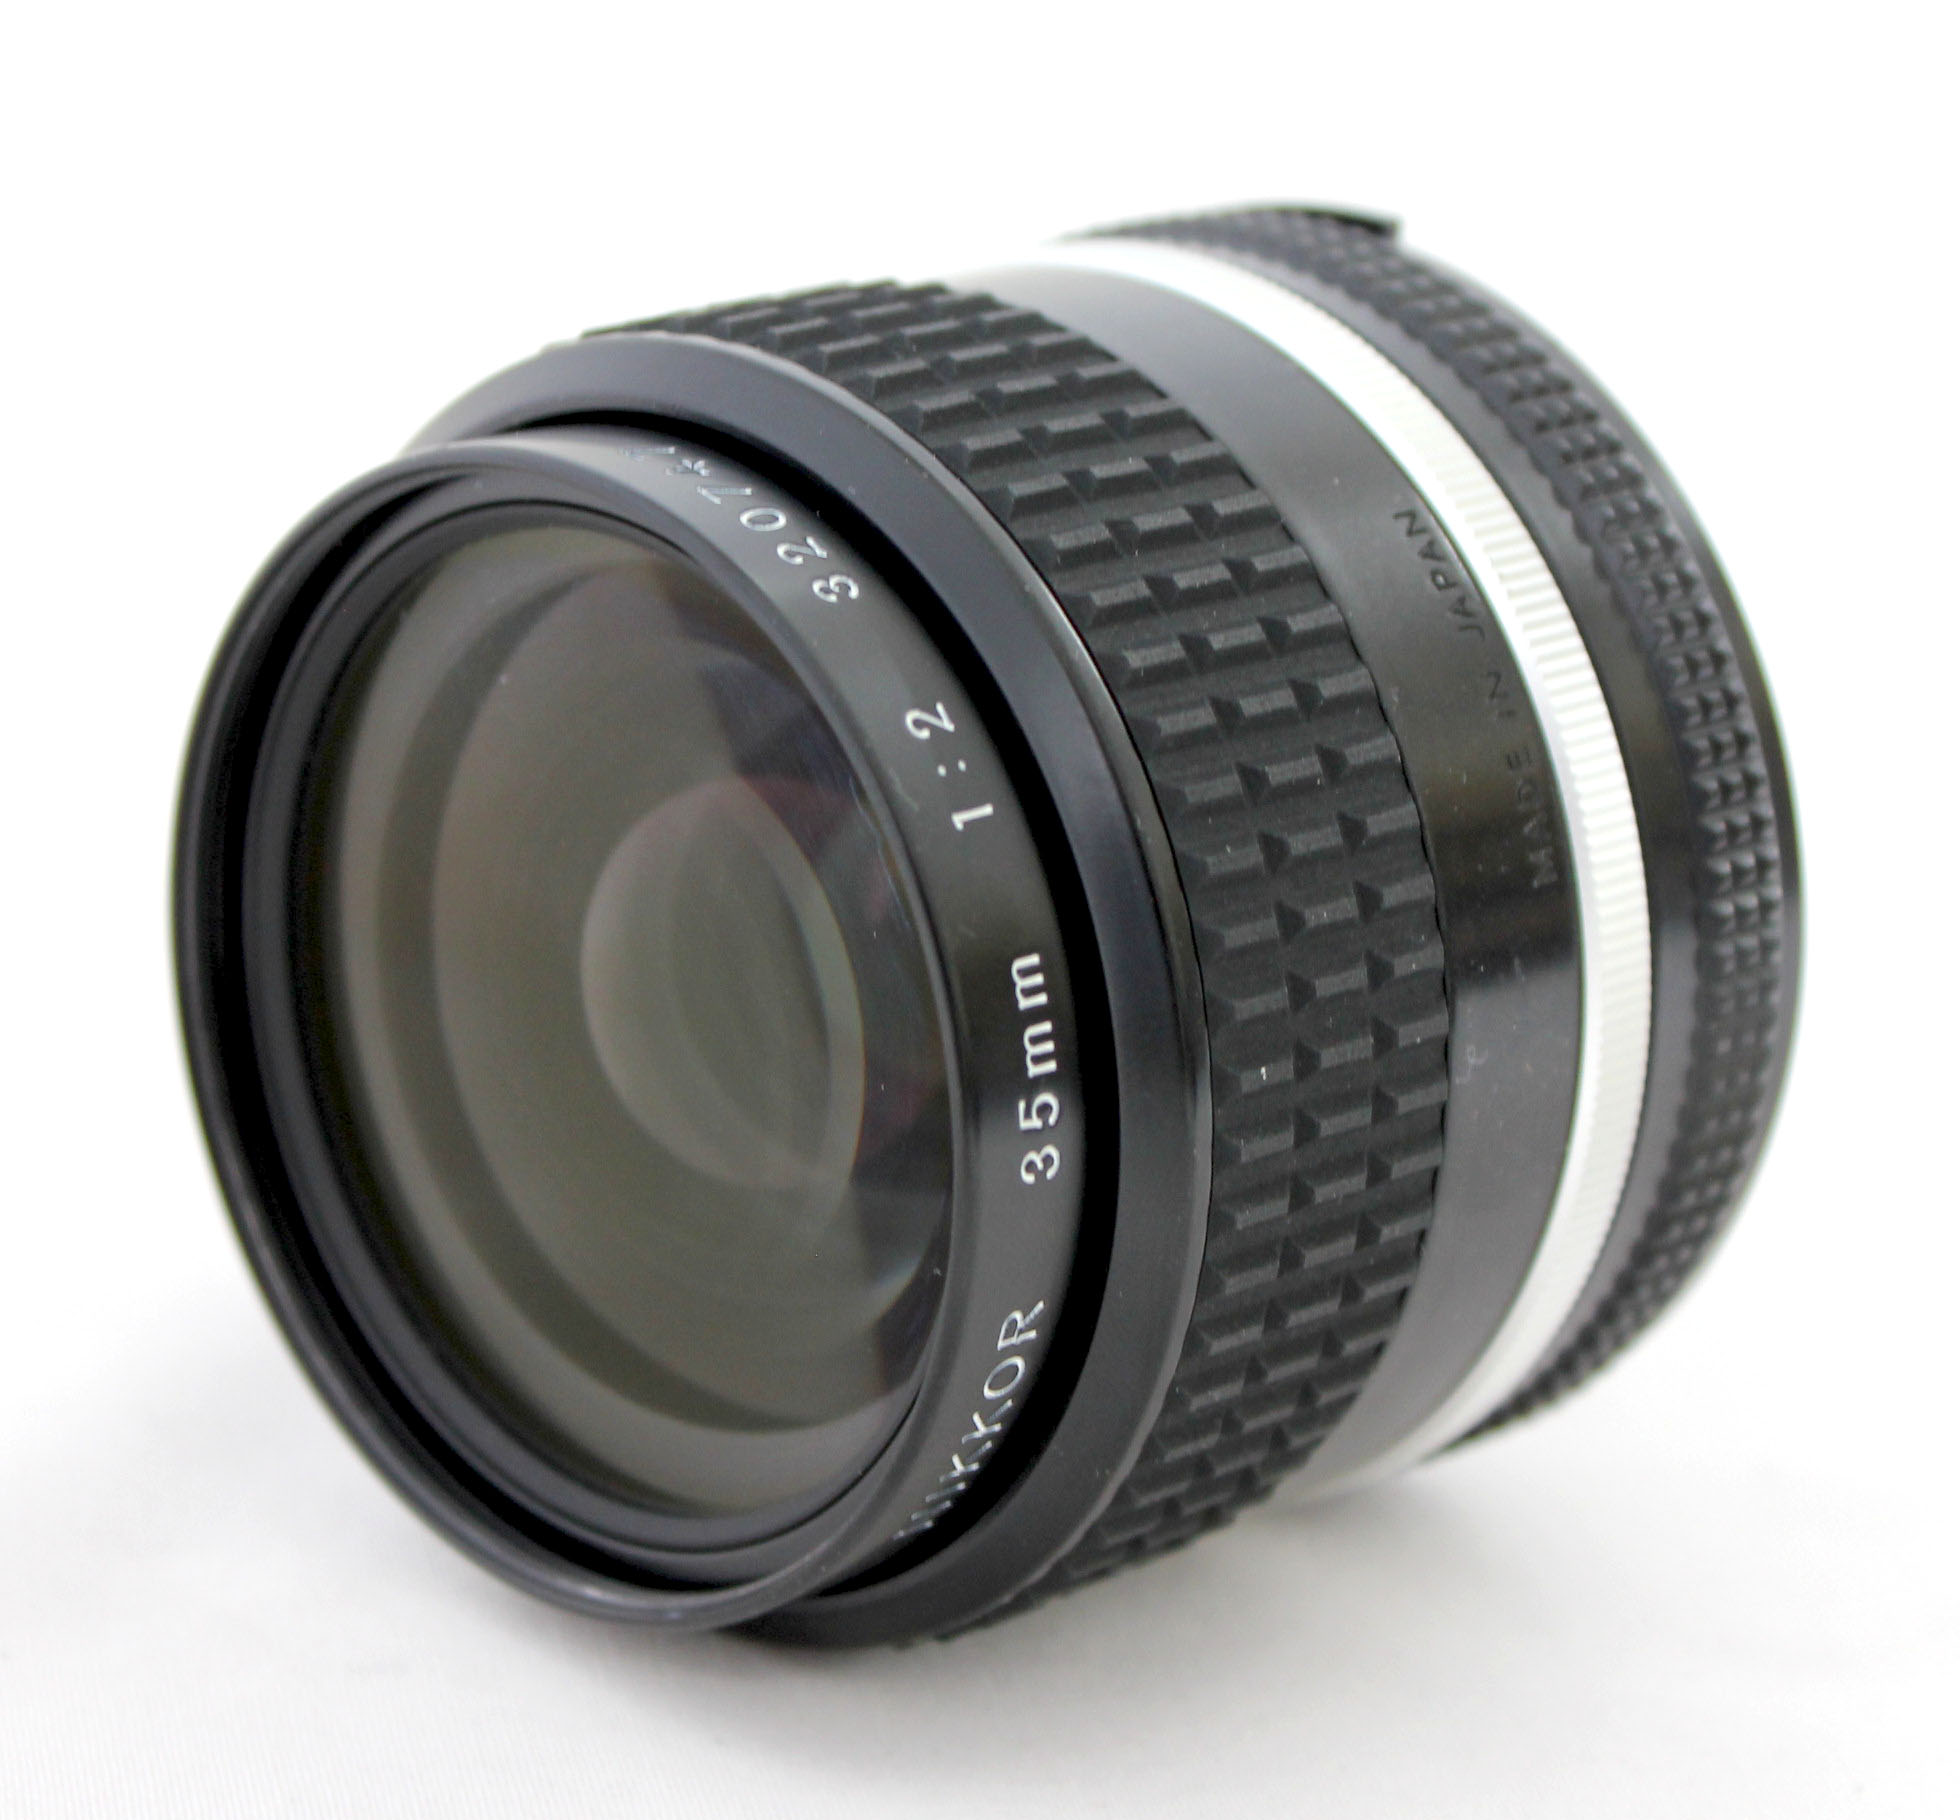 Nikon Ai-s Ais Nikkor 35mm F/2 Wide Angle MF Lens S/N32* SIC Version with Hood HN-3 from Japan Photo 2